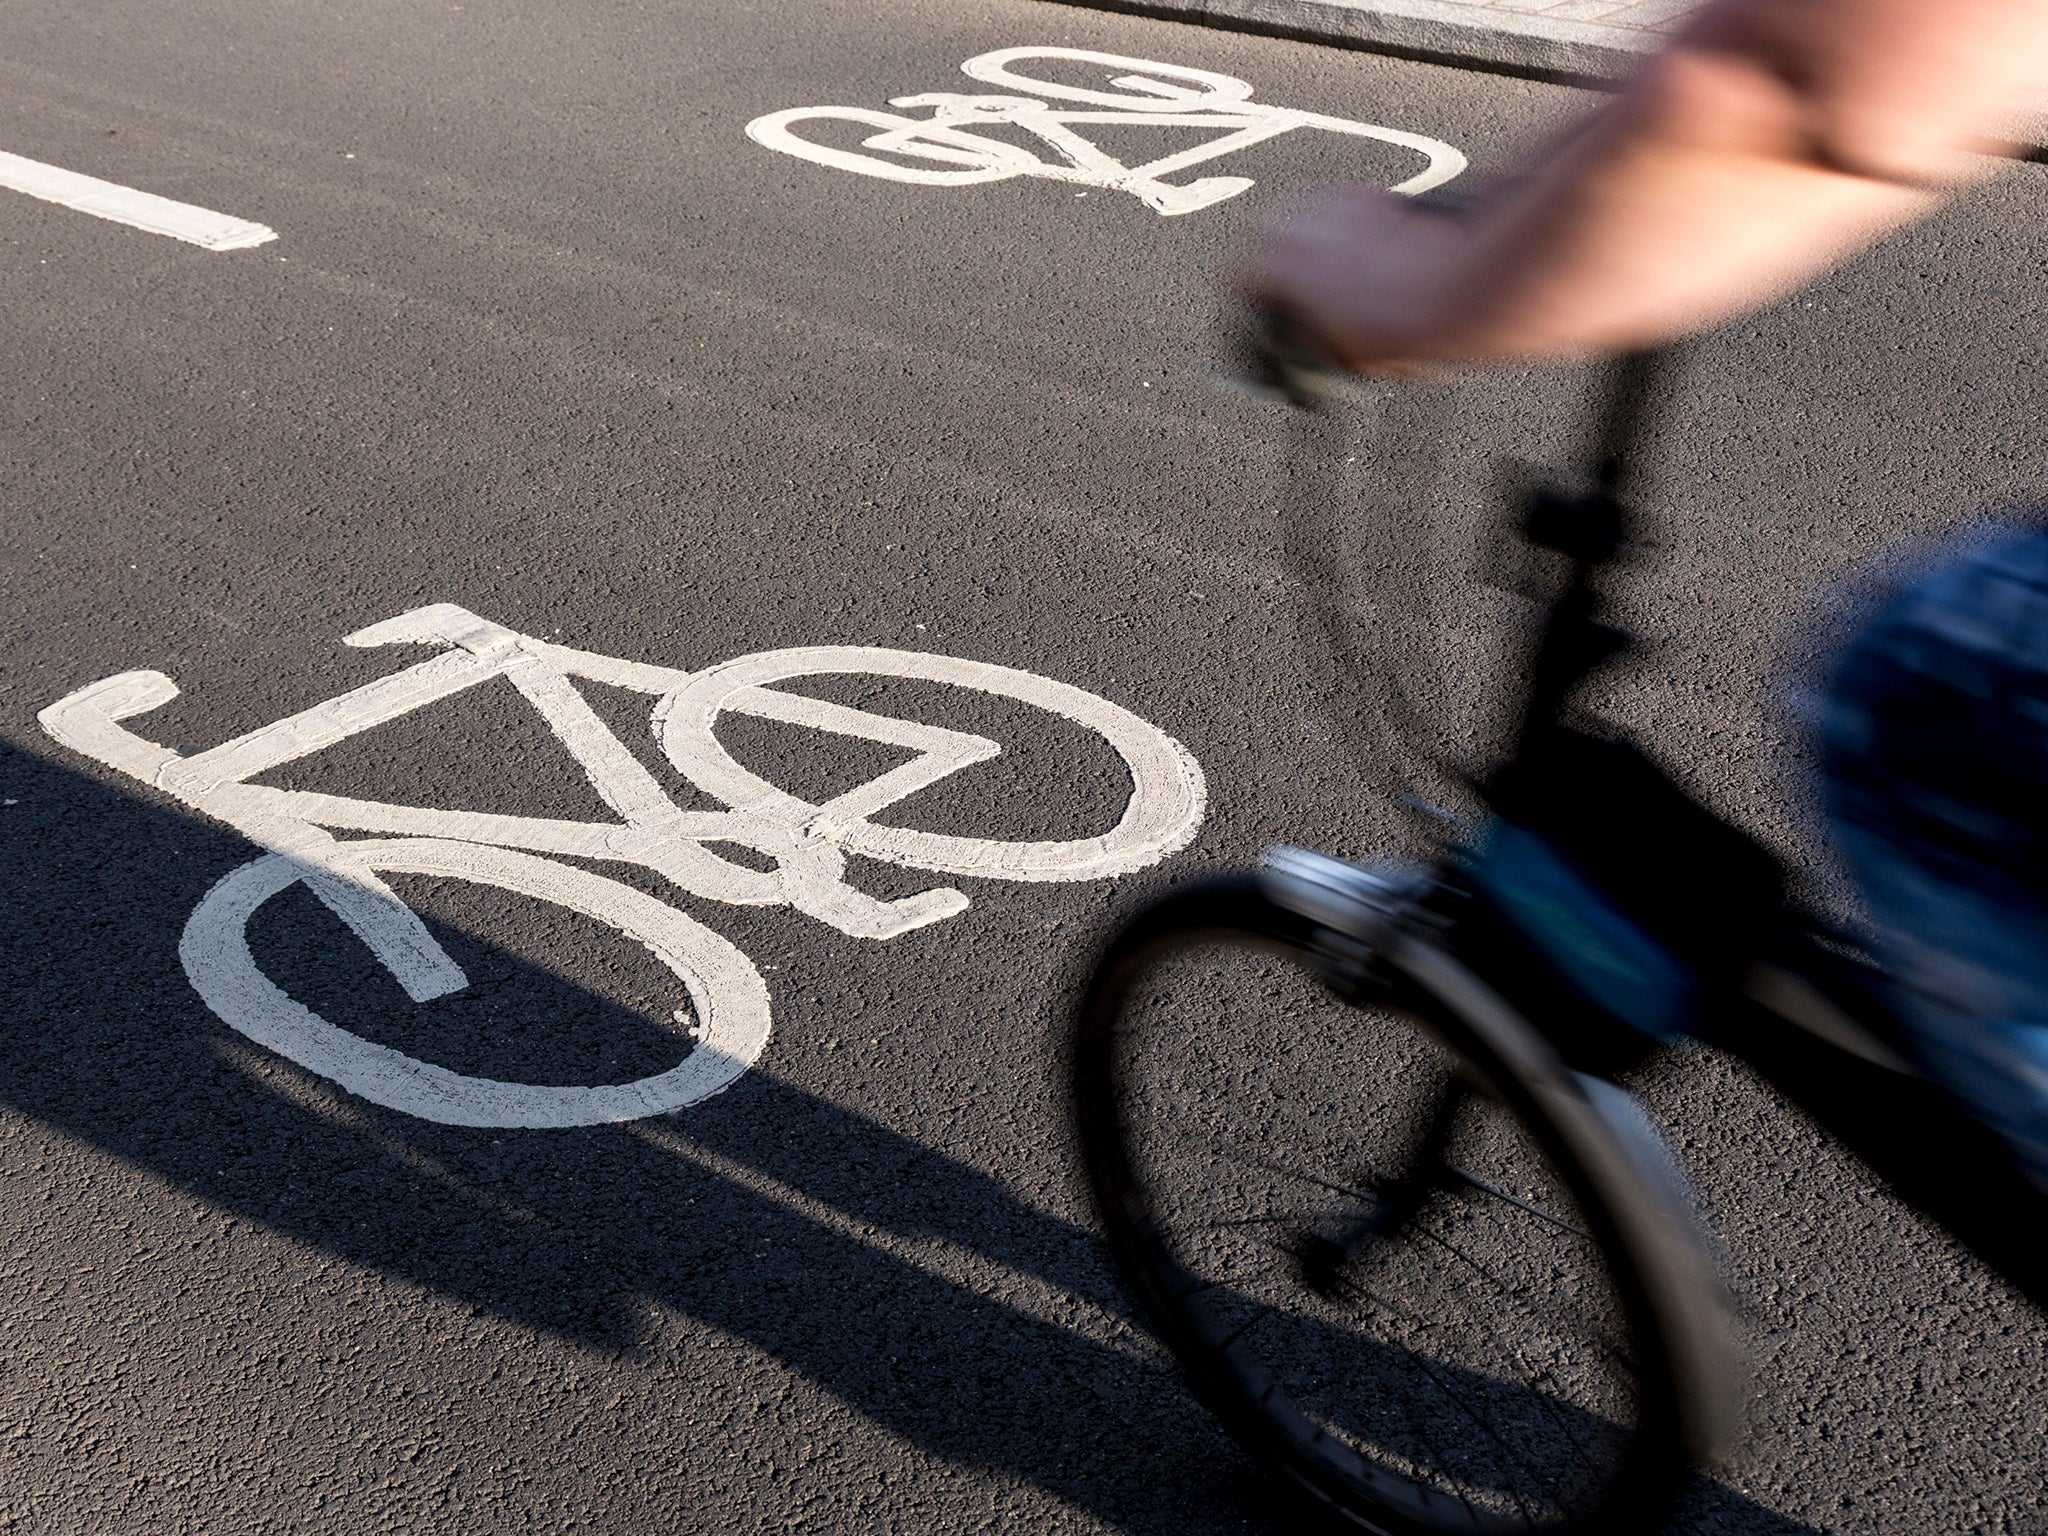 Promoting biking and walking is one way to lower energy use